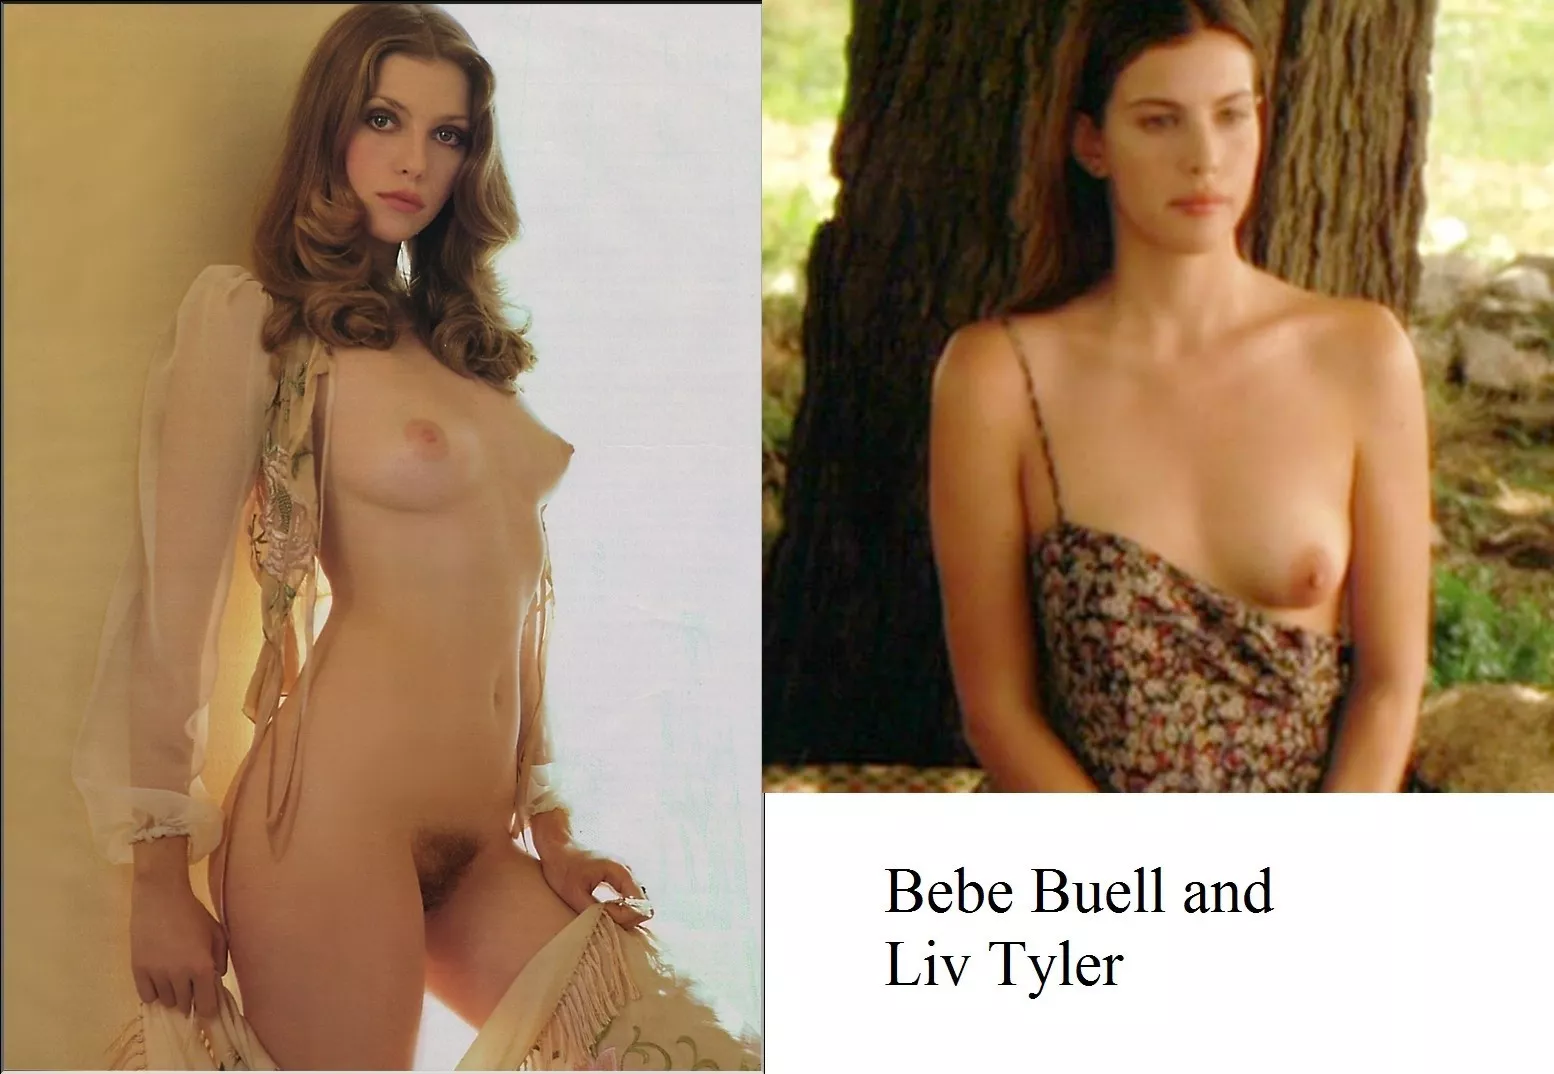 Browse mother and daughter bebe buell and liv tyler - CelebNudes for free o...